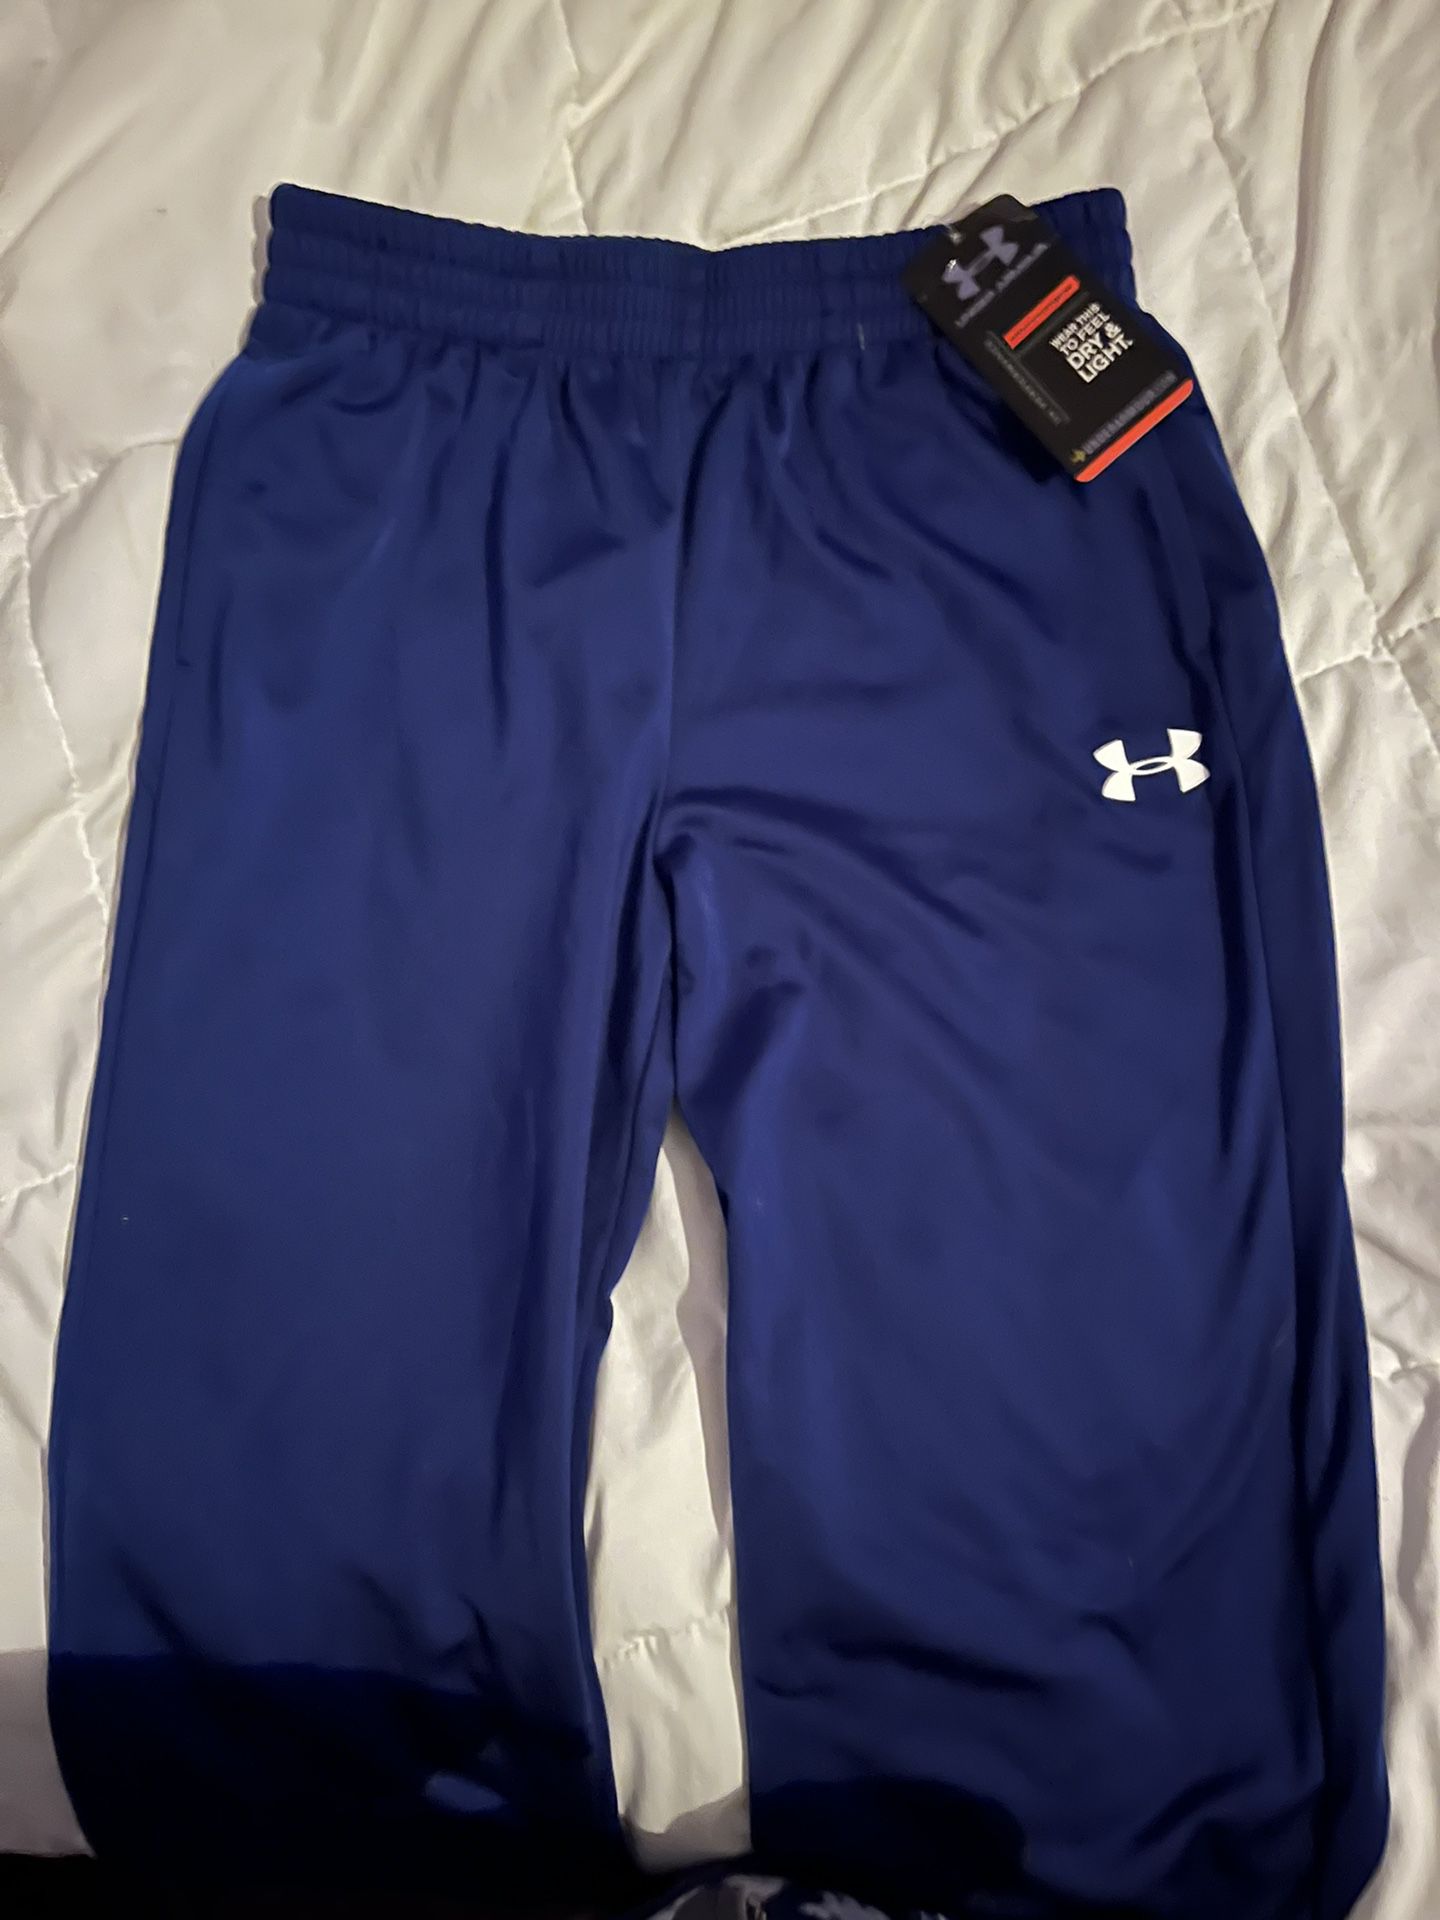 Under Armour Youth XL Navy Blue Pants for Sale in Red Lion, PA - OfferUp